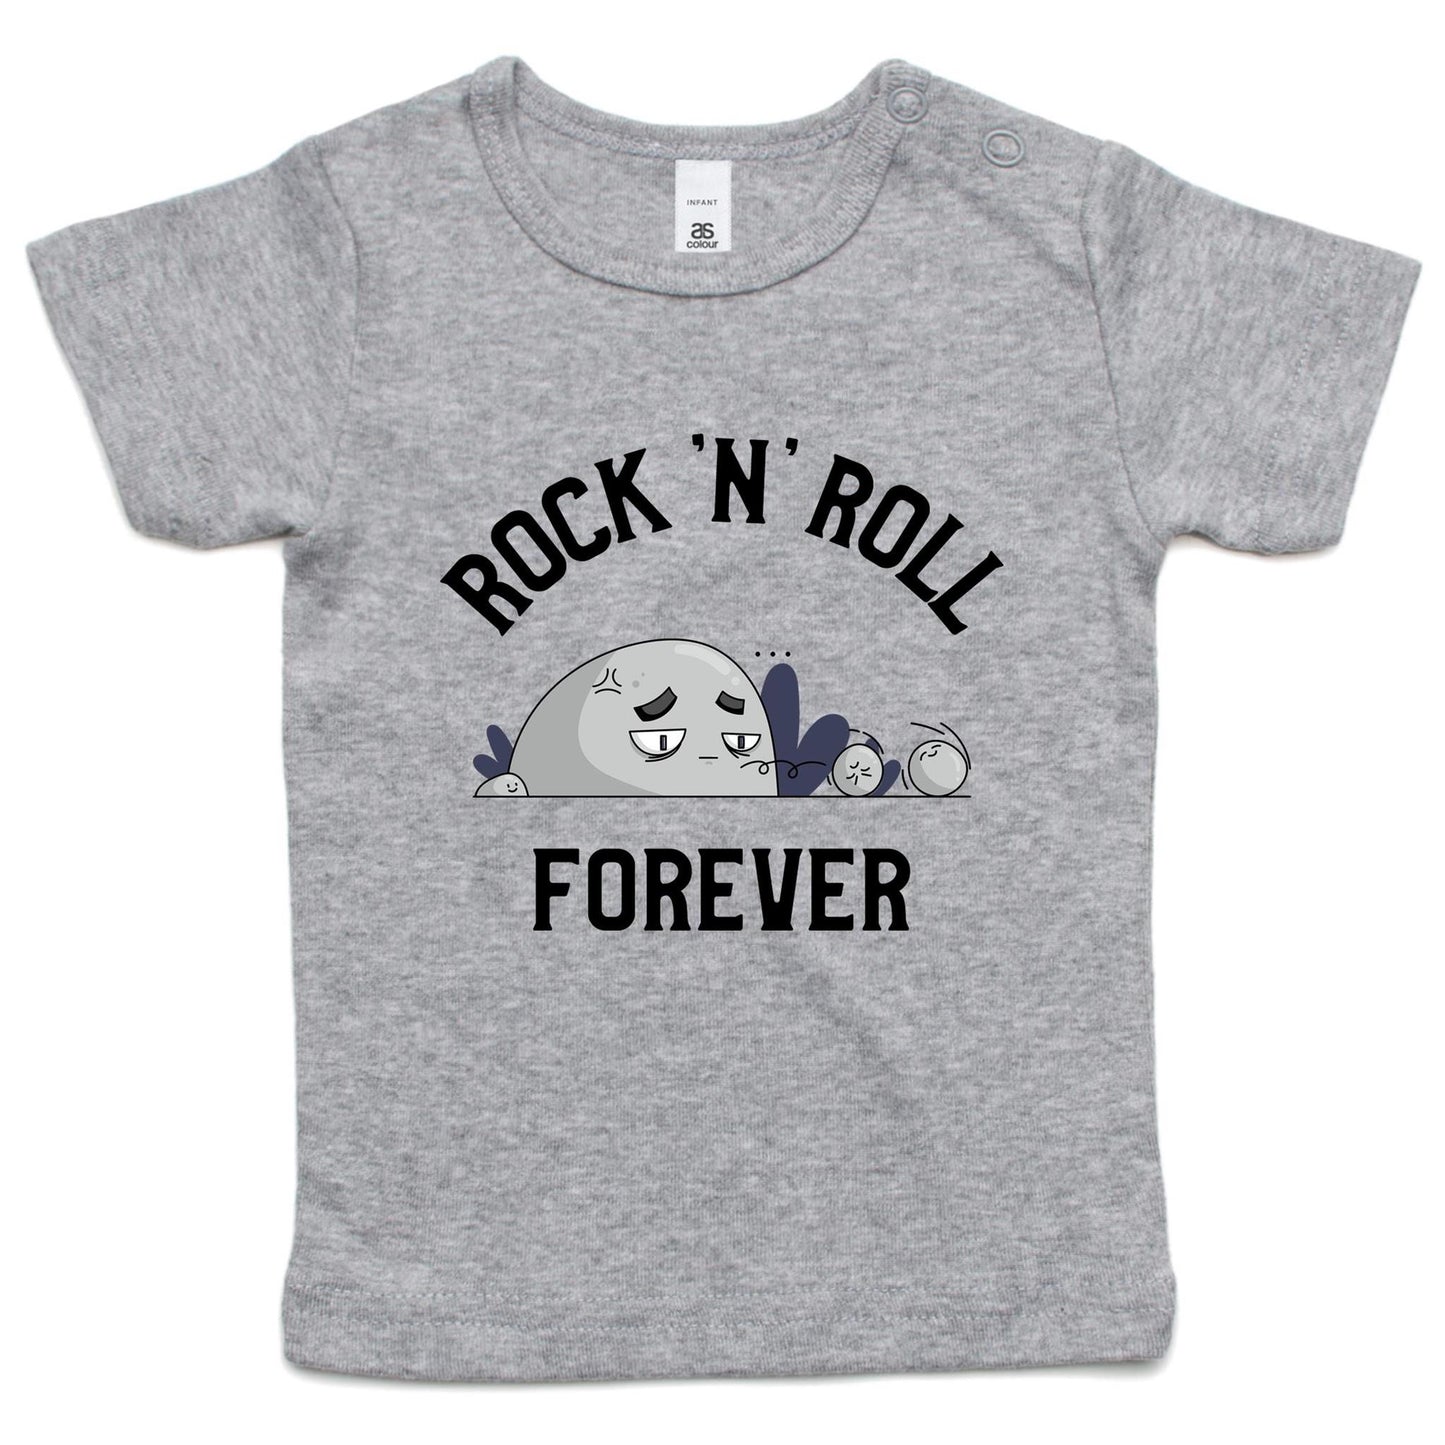 Rock 'N' Roll Forever - Baby T-shirt Grey Marle Baby T-shirt Music